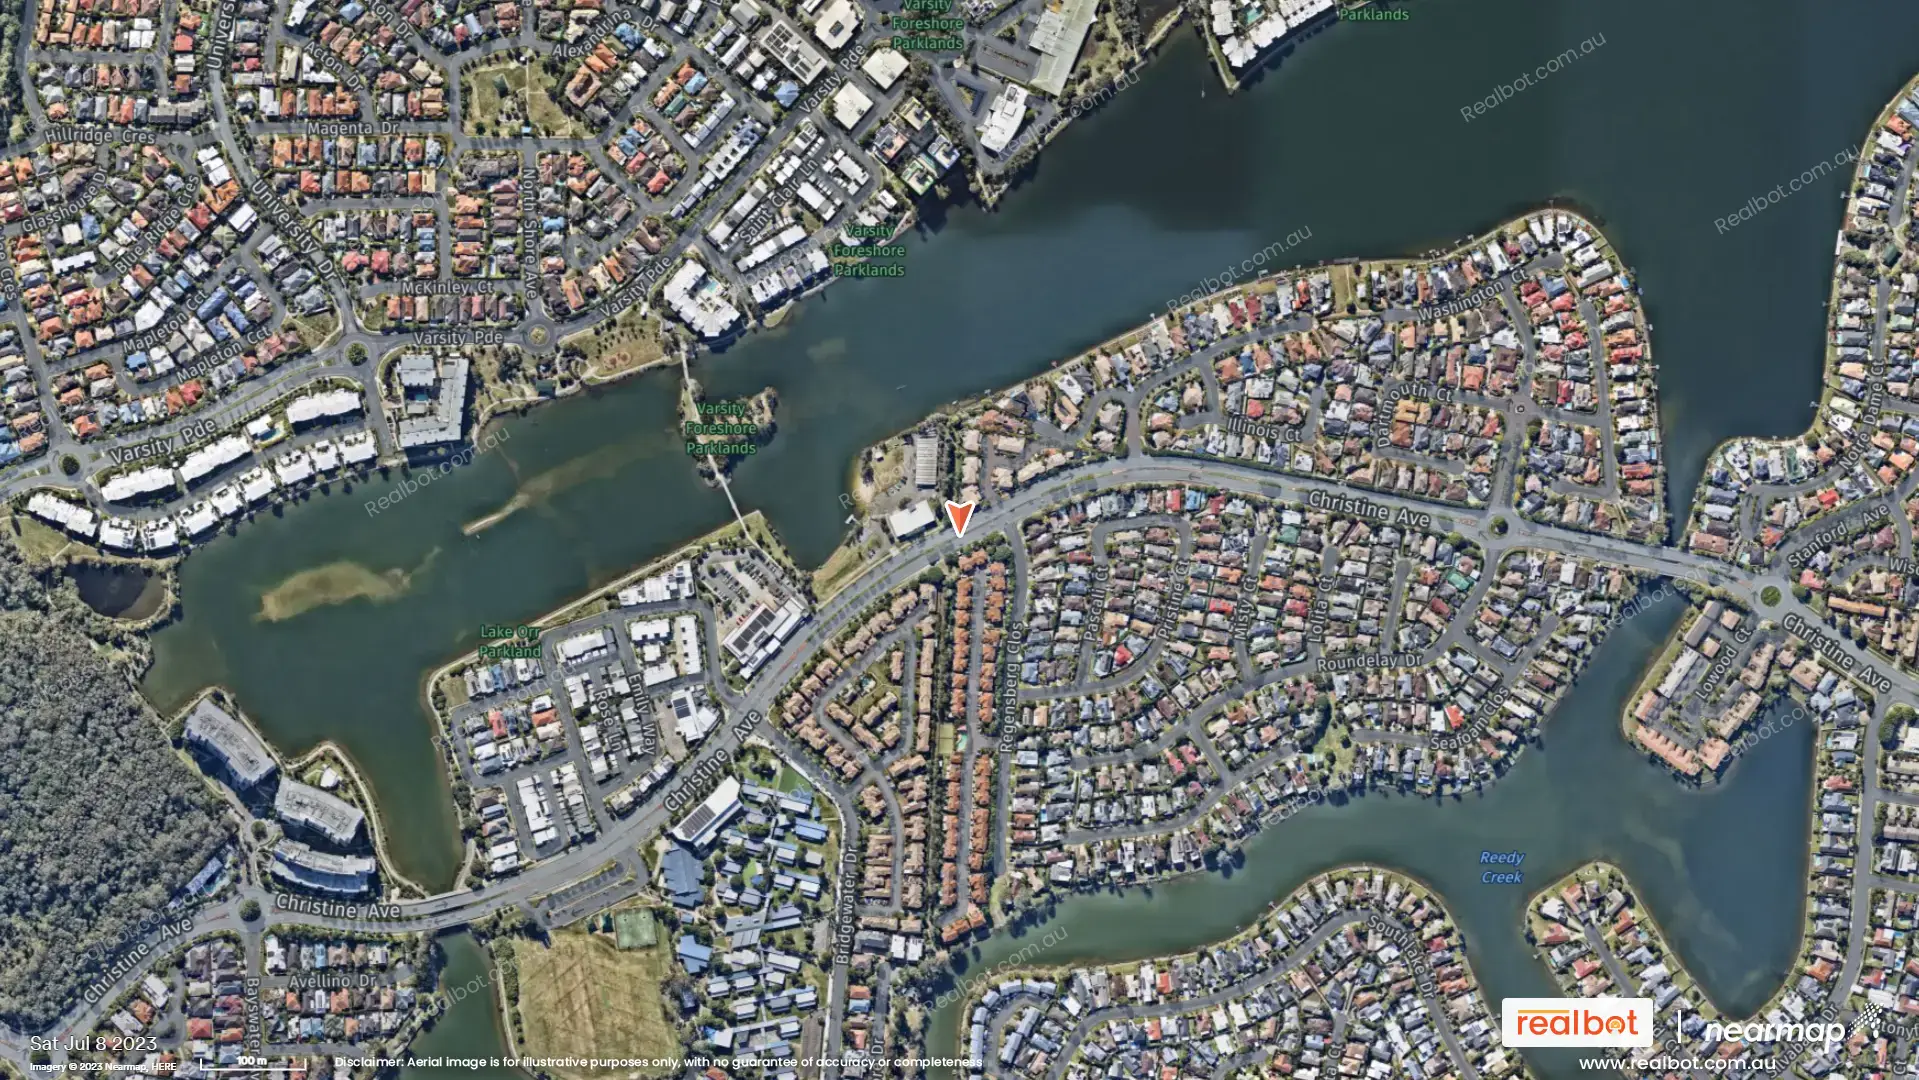 varsity-lakes-qld-4227-Suburb-Profile-And-Aerial-Images-Real-Search